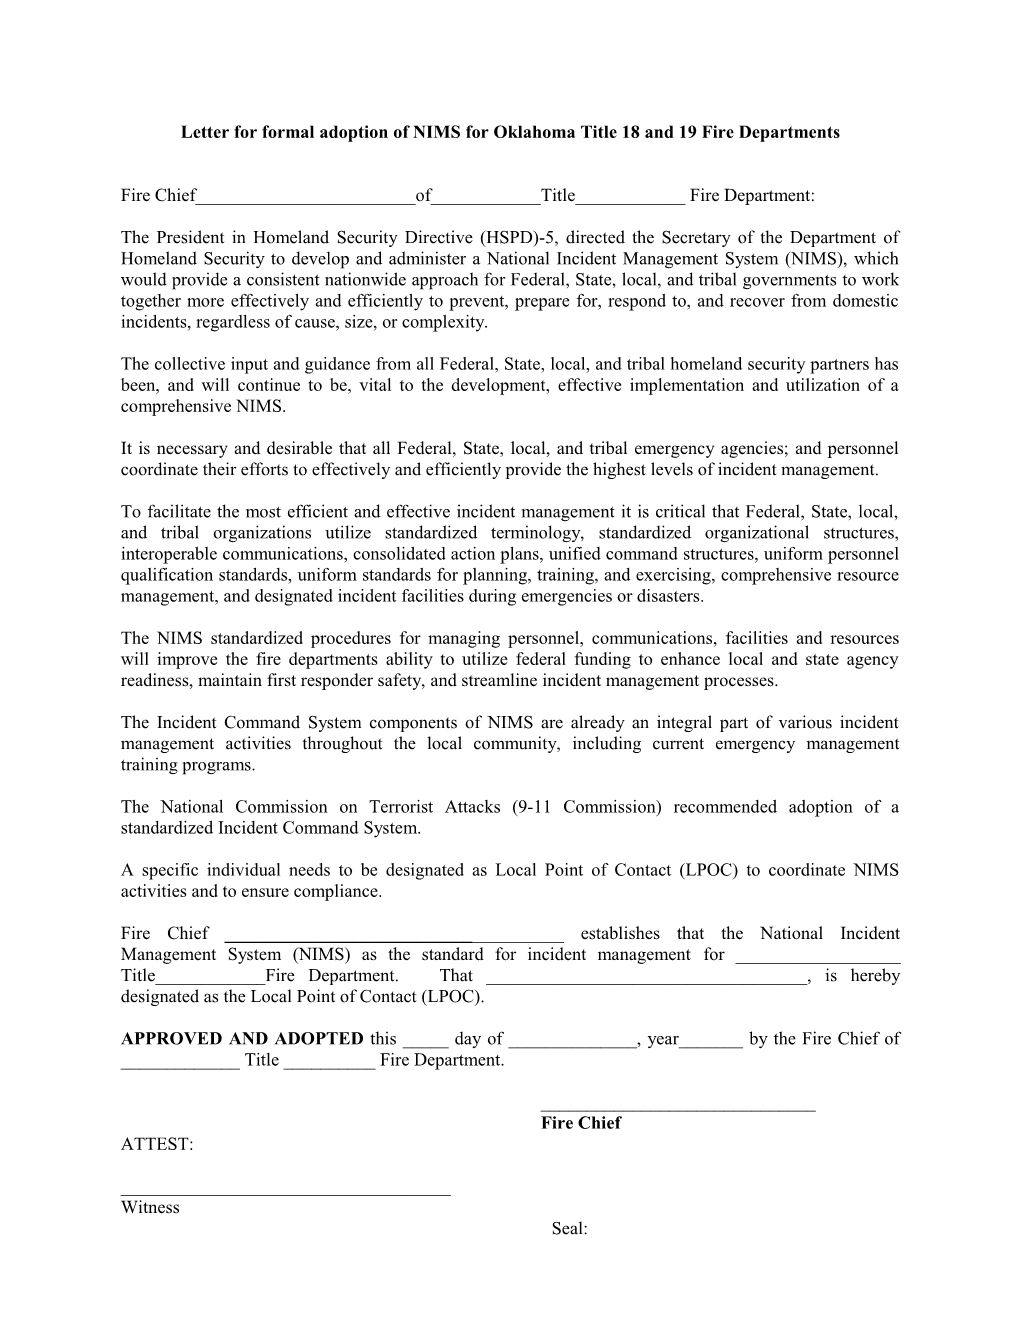 Letter for Formal Adoption of NIMS for Oklahoma Title 18 and 19 Fire Departments